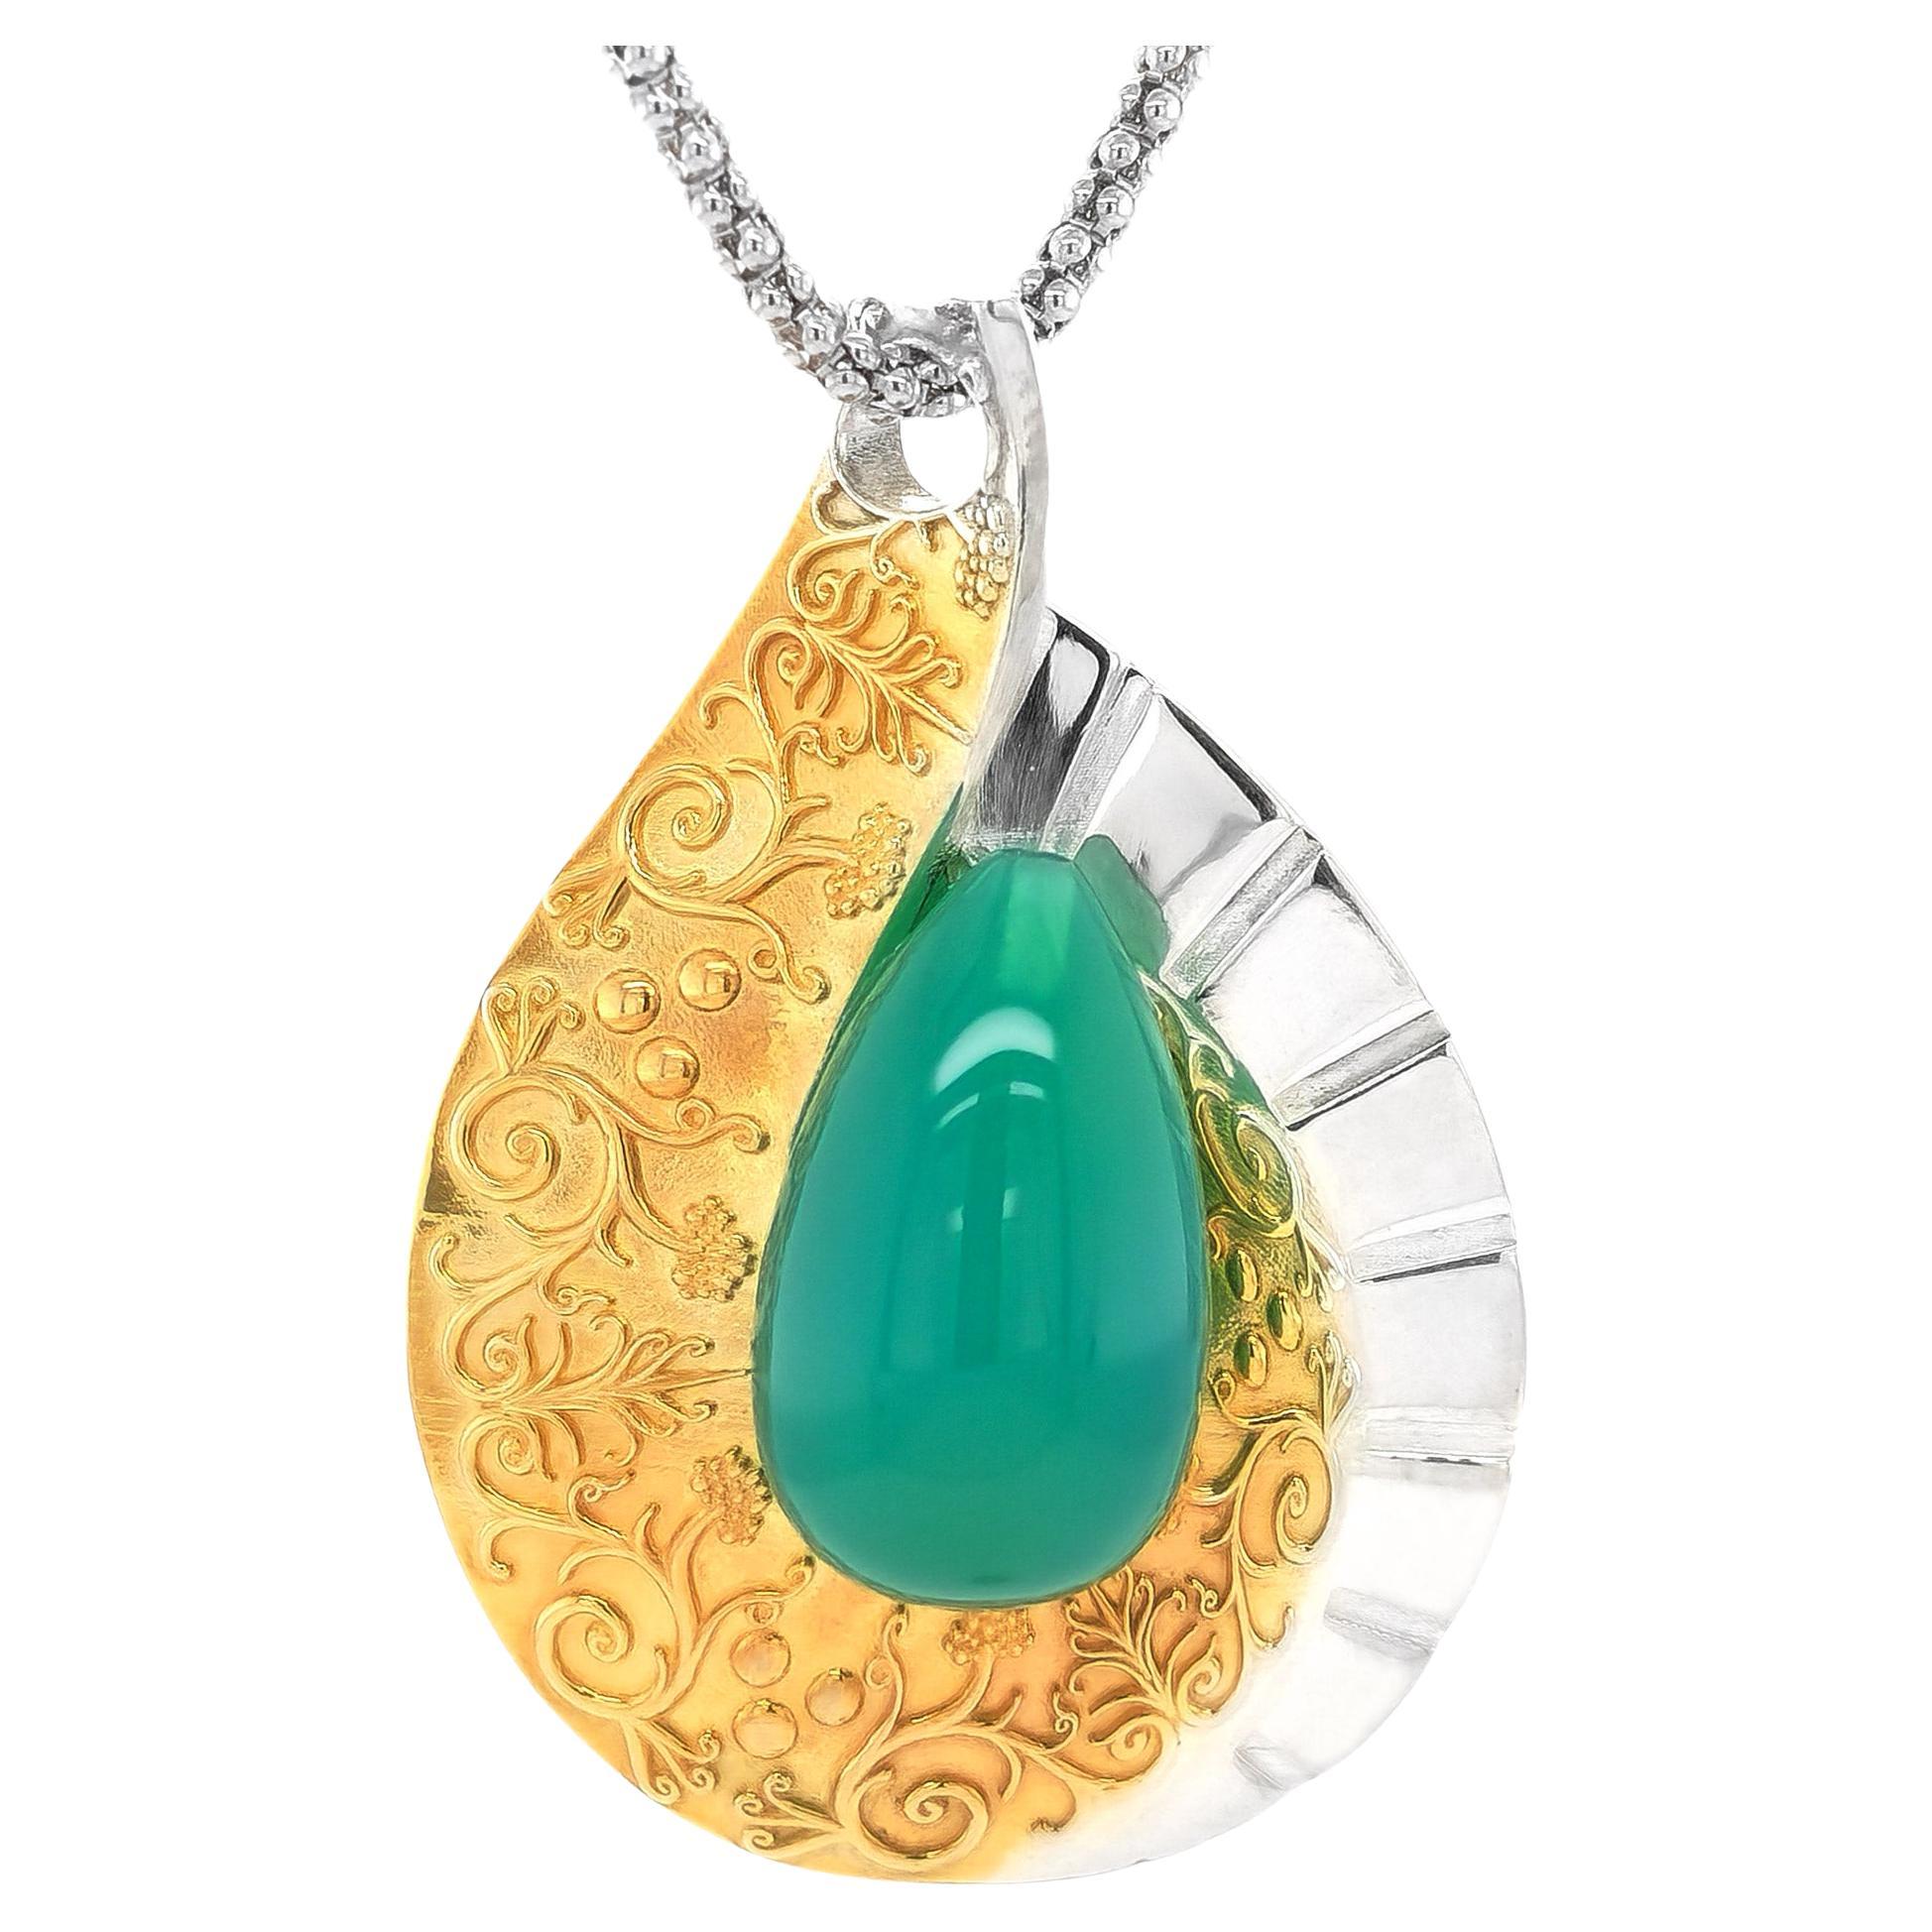 "Paraiba" color Agate 15.27 carats set in Silver and 14K Gold Plated Pendant For Sale